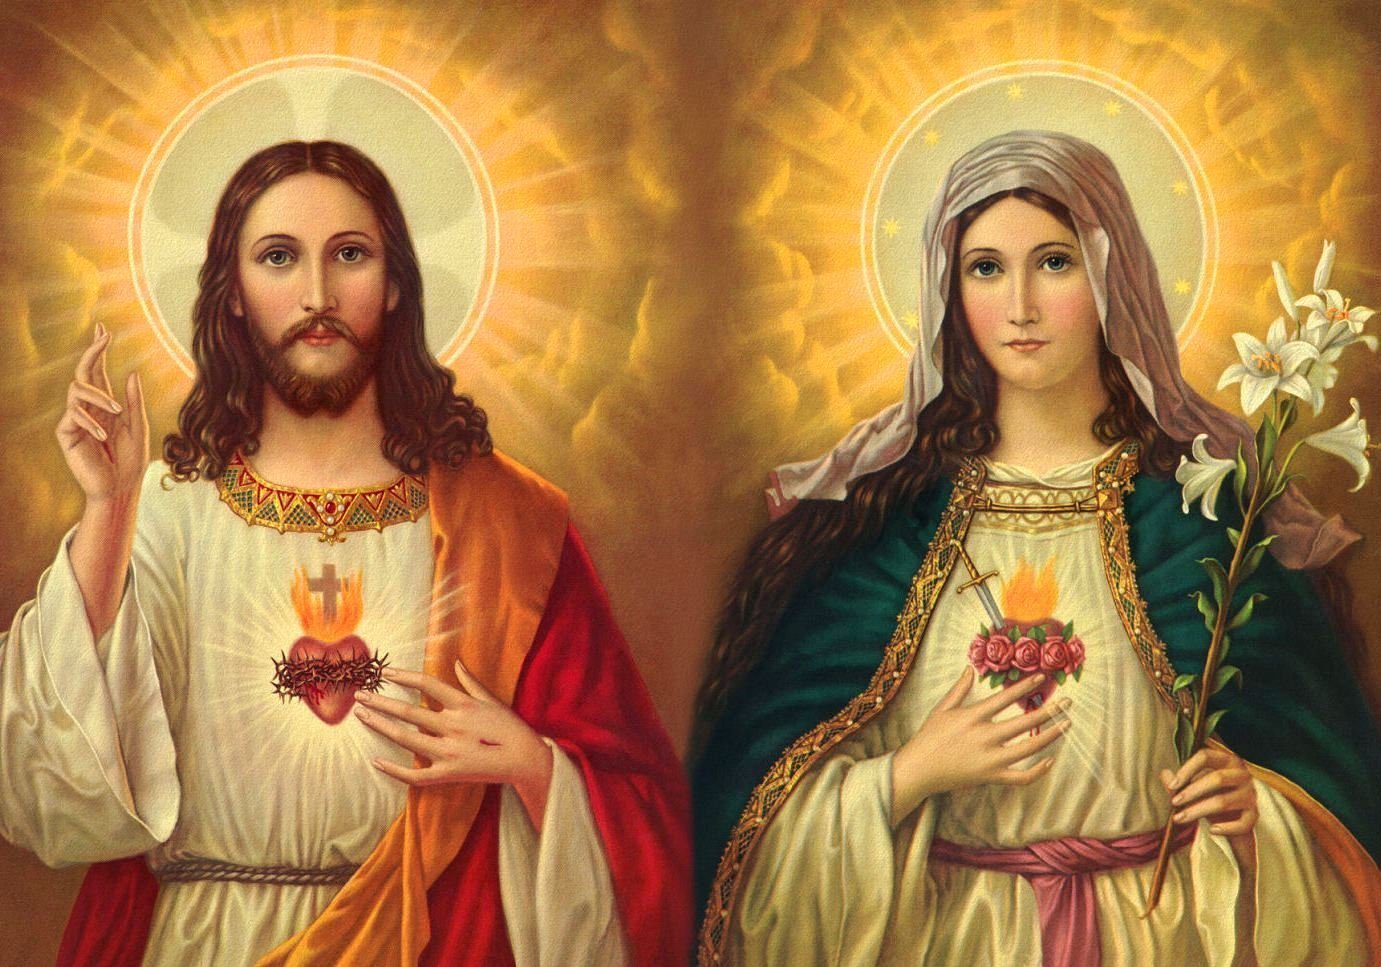 Jesus and Mary POSTER A2 print Sacred Heart of Jesus and Virgin Mary painting Religious Artwork Catholic picture Christian Holy Wall Art Decor for Home Room, Handmade Products